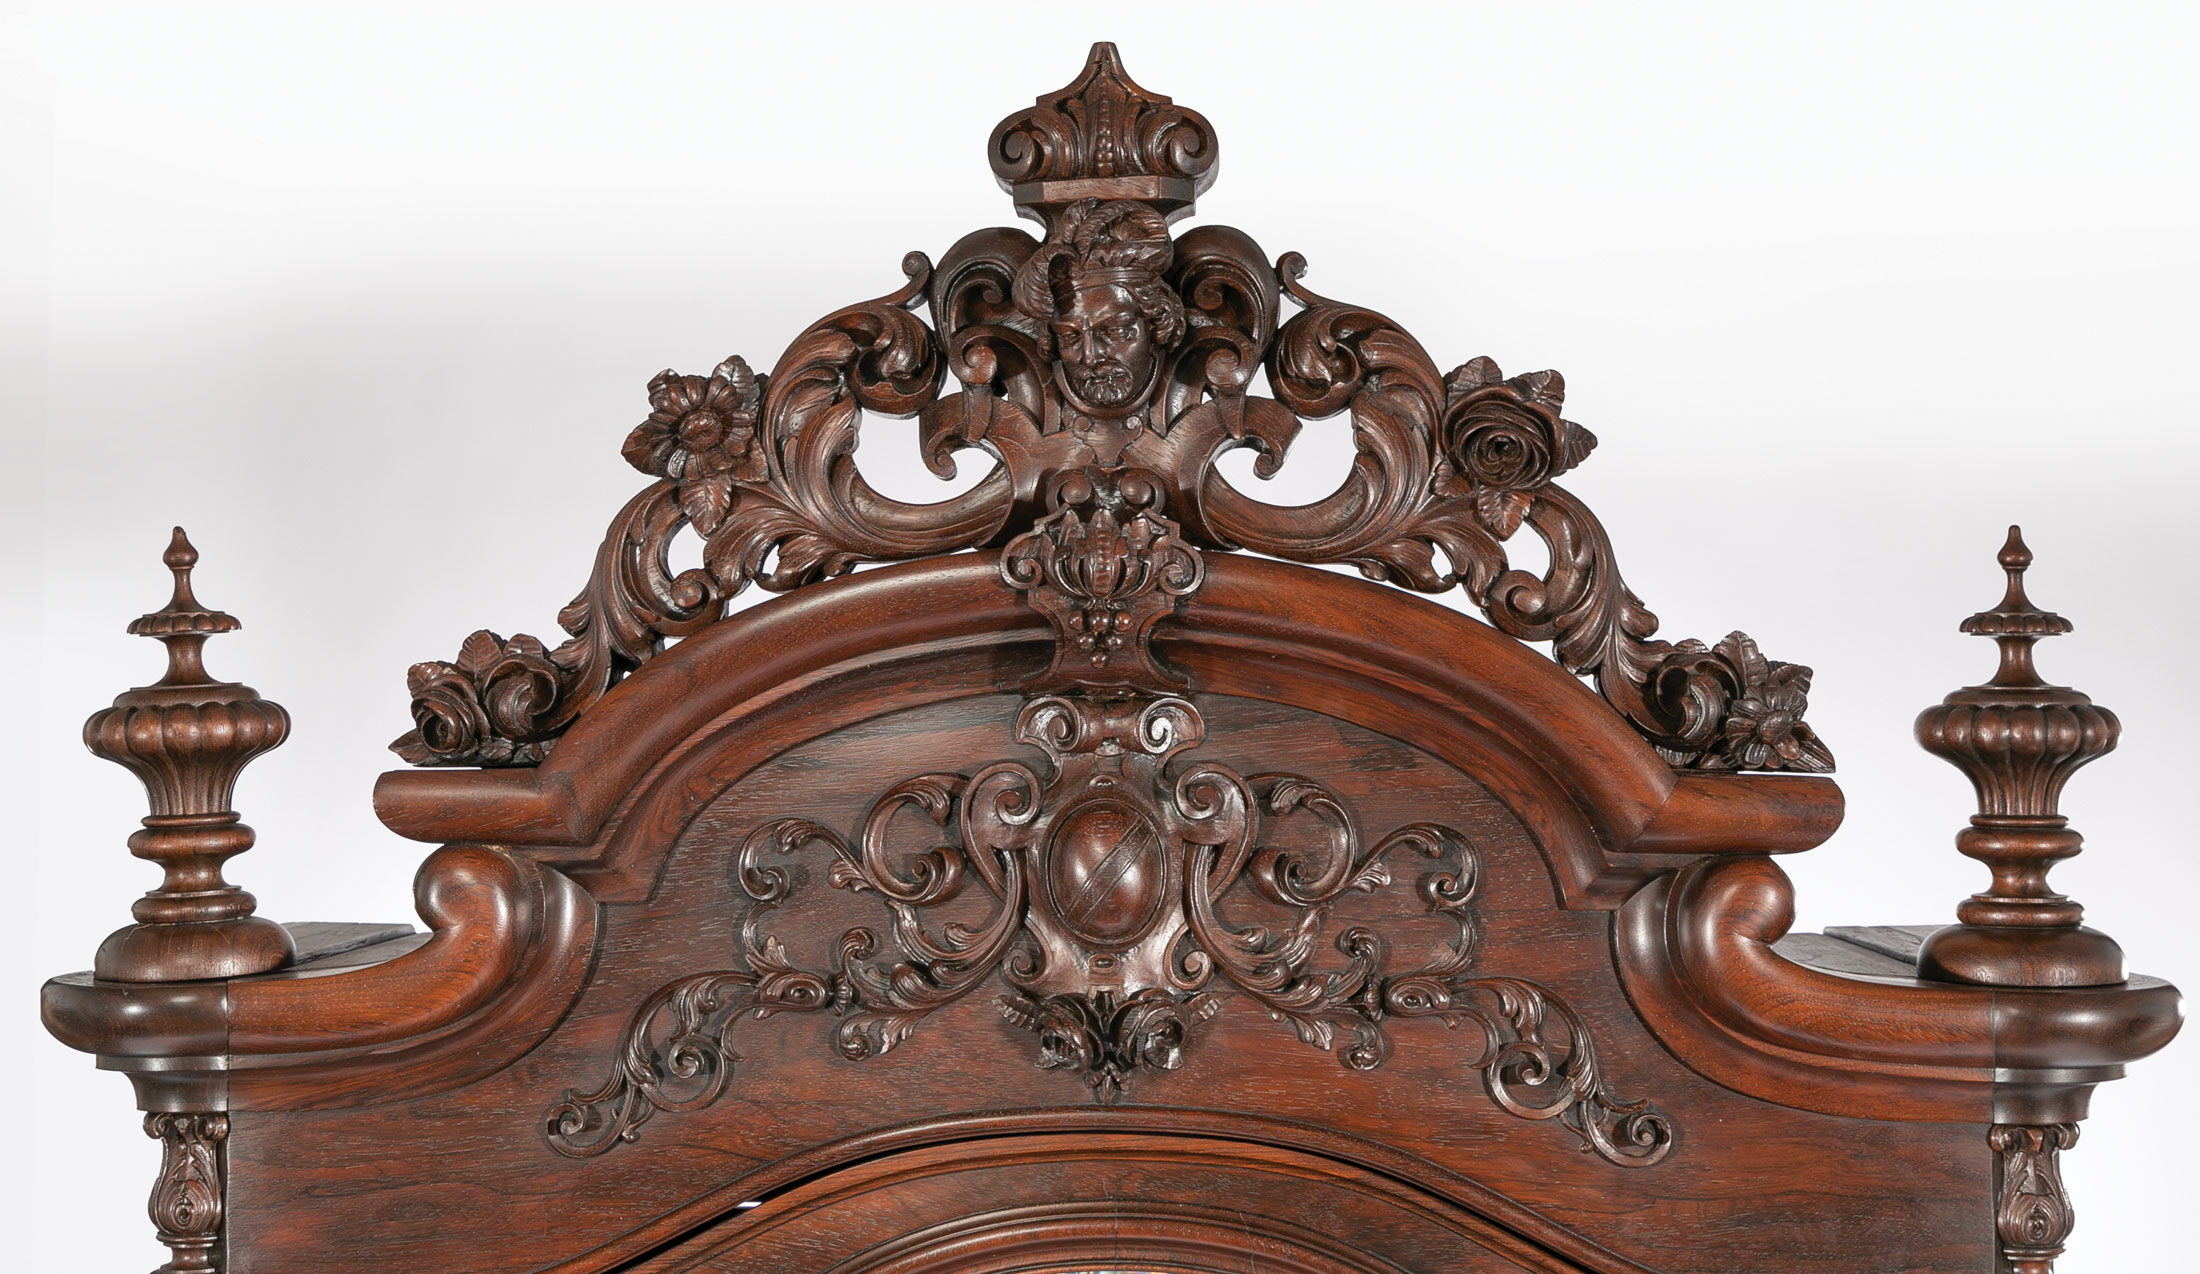 Very Fine American Carved Rosewood Bedroom Suite , mid-19th c., labeled A. (Alexander) Roux, incl. - Image 9 of 20